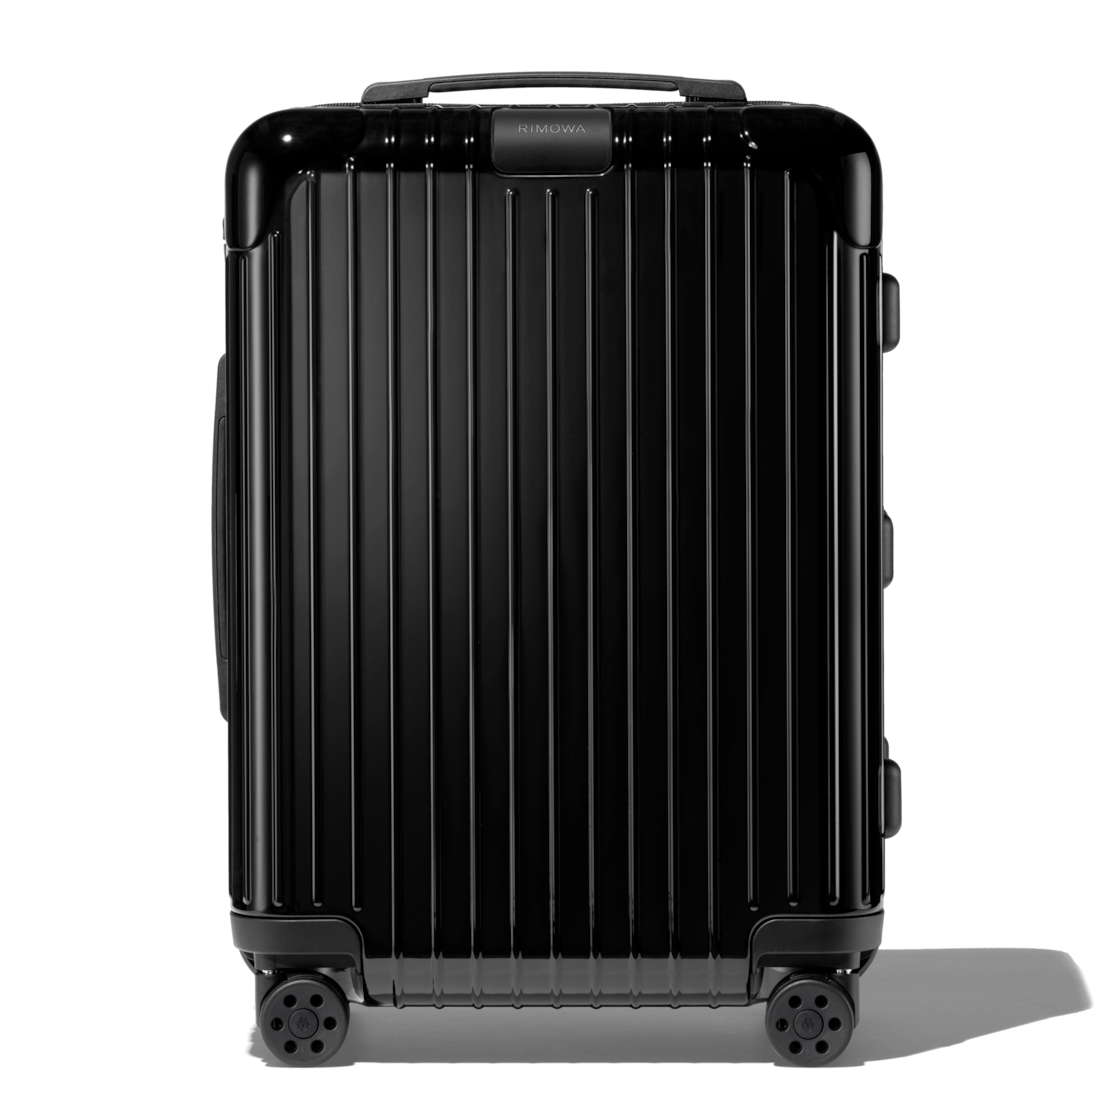 Essential Cabin Lightweight Carry-On Suitcase, Black Gloss